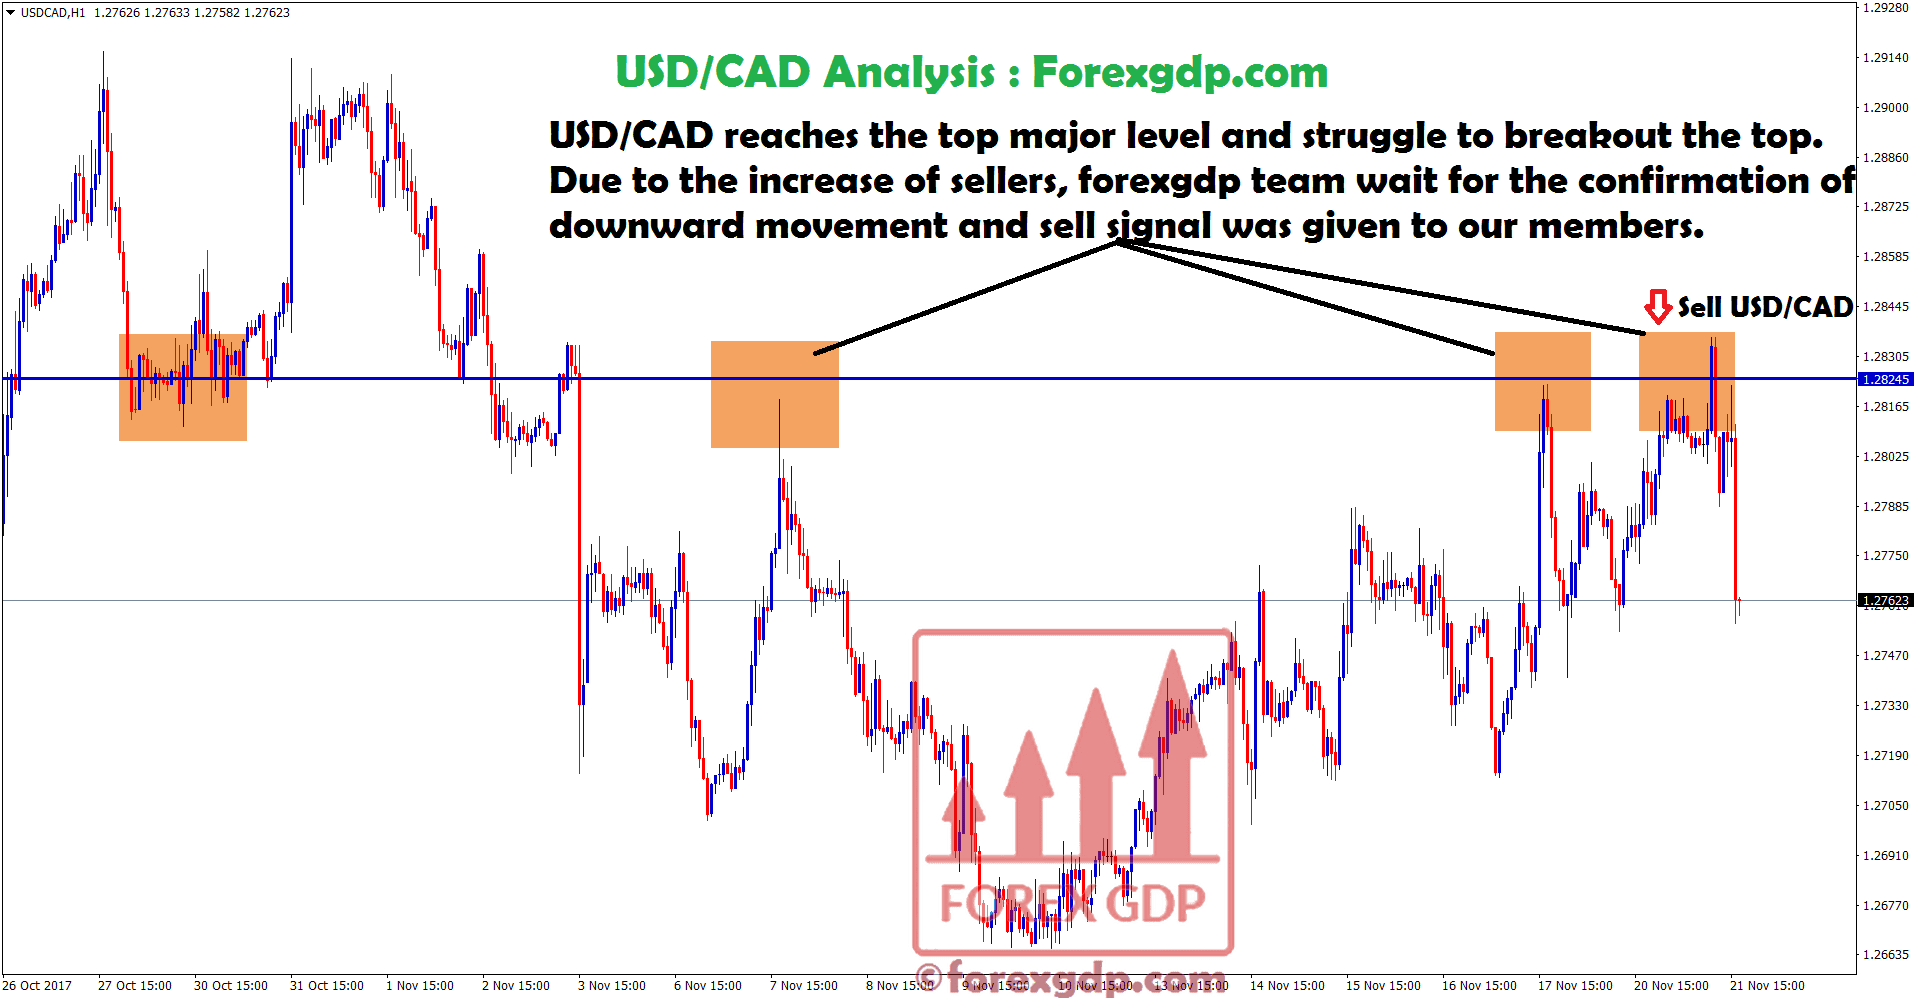 USDCAD resistance support level in 1 hr chart